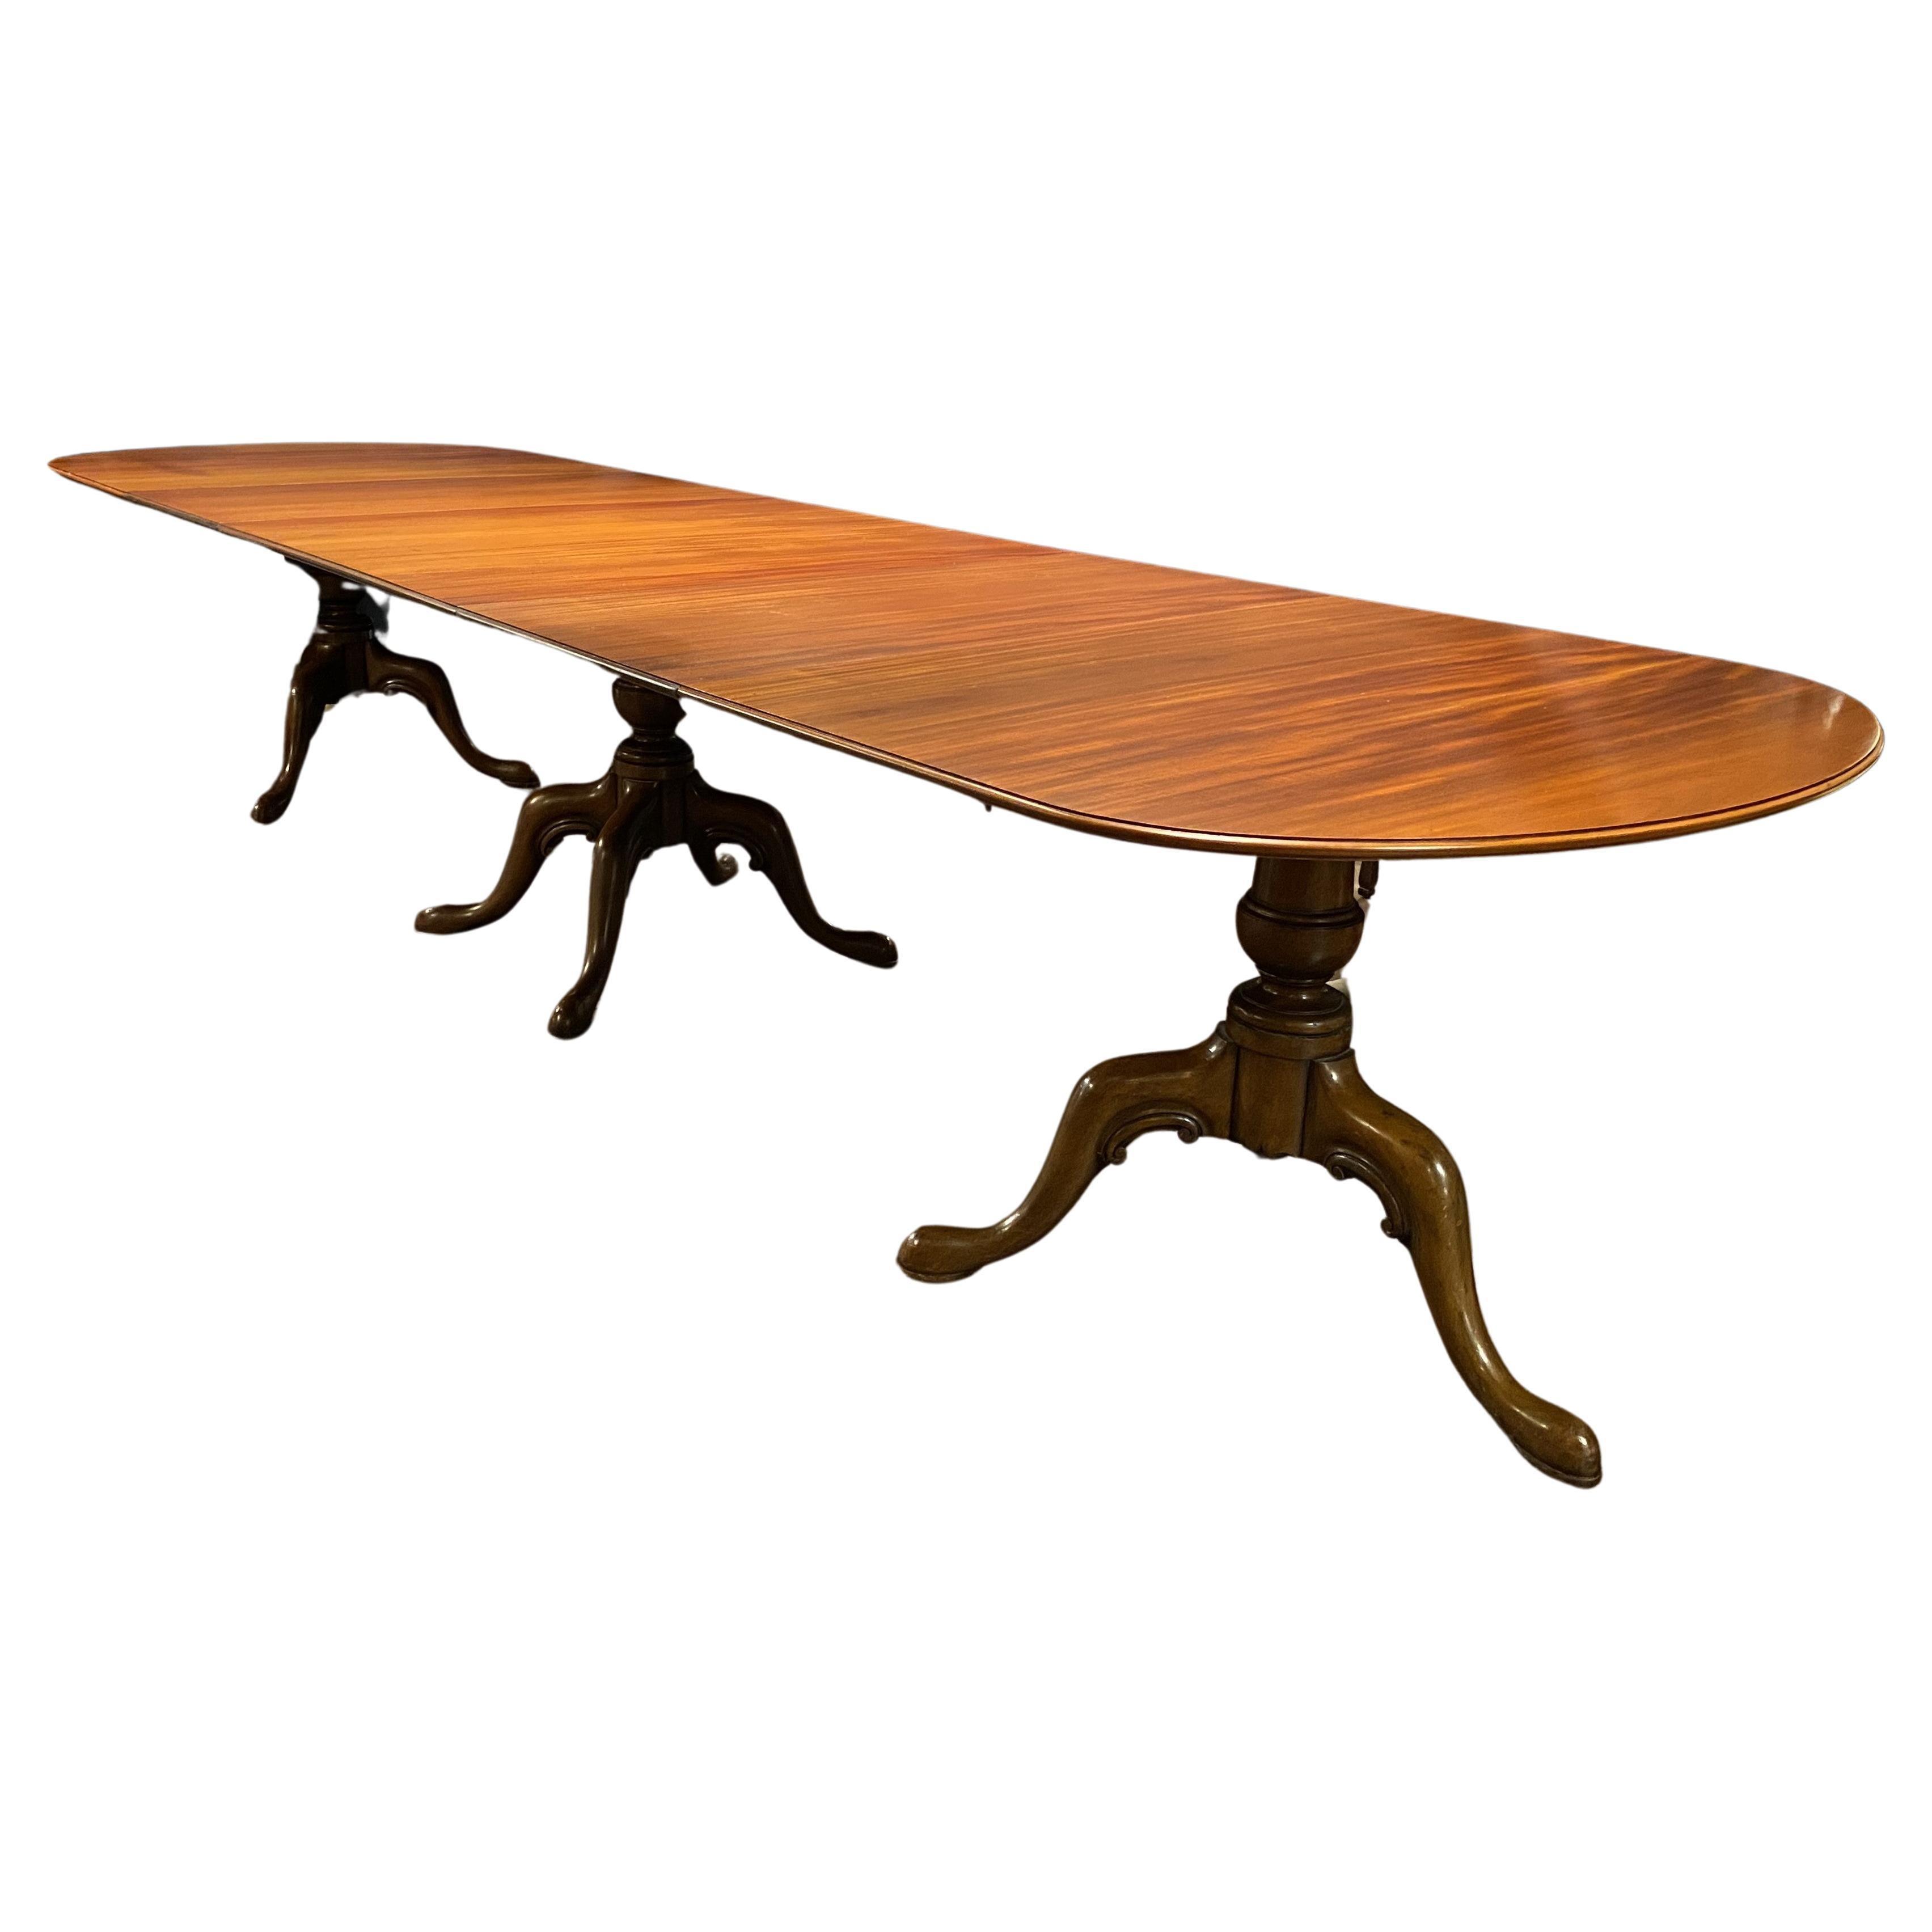 Georgian Style Walnut or Mahogany Triple Pedestal Dining Table with Two Leaves